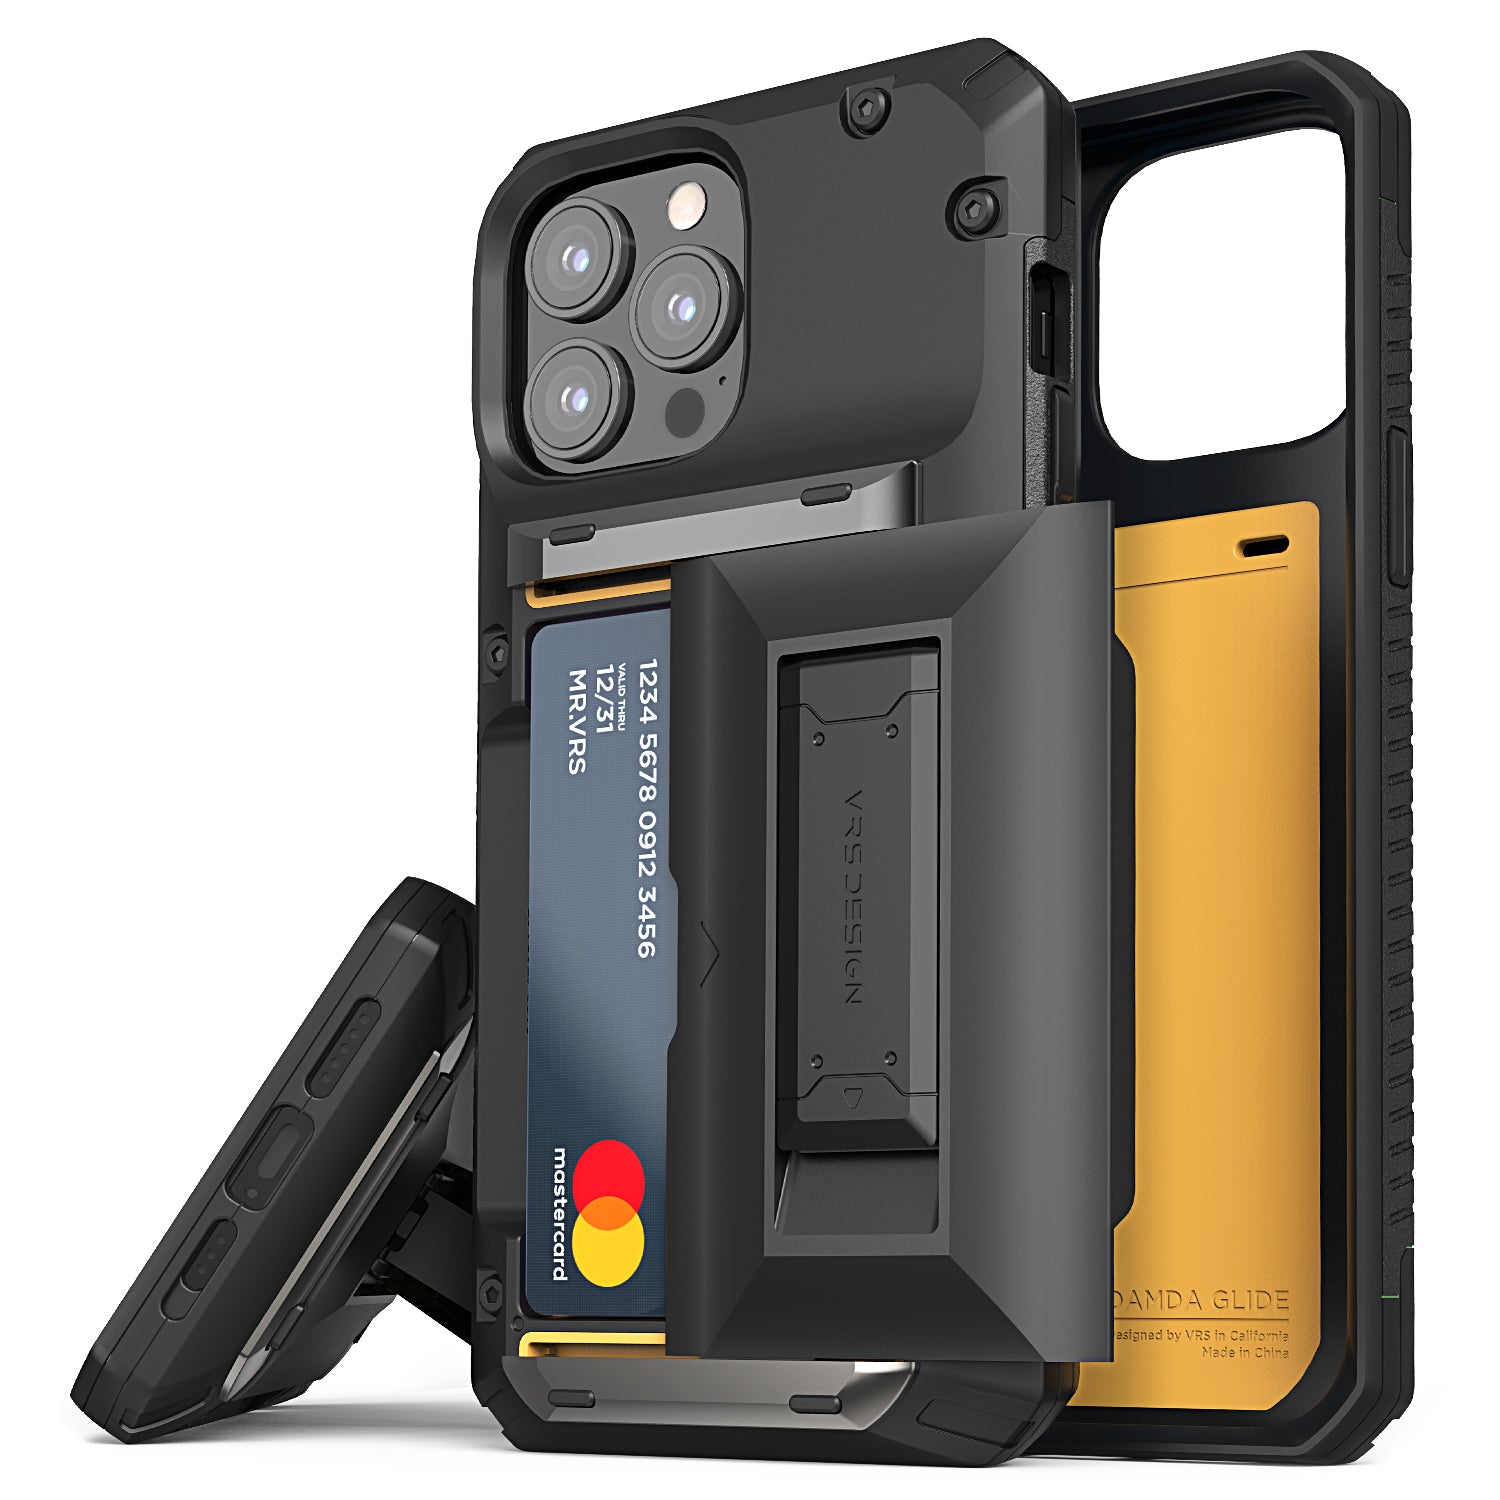 Rugged modern Apple iPhone 14 Pro Max case Glide Hybrid by VRS